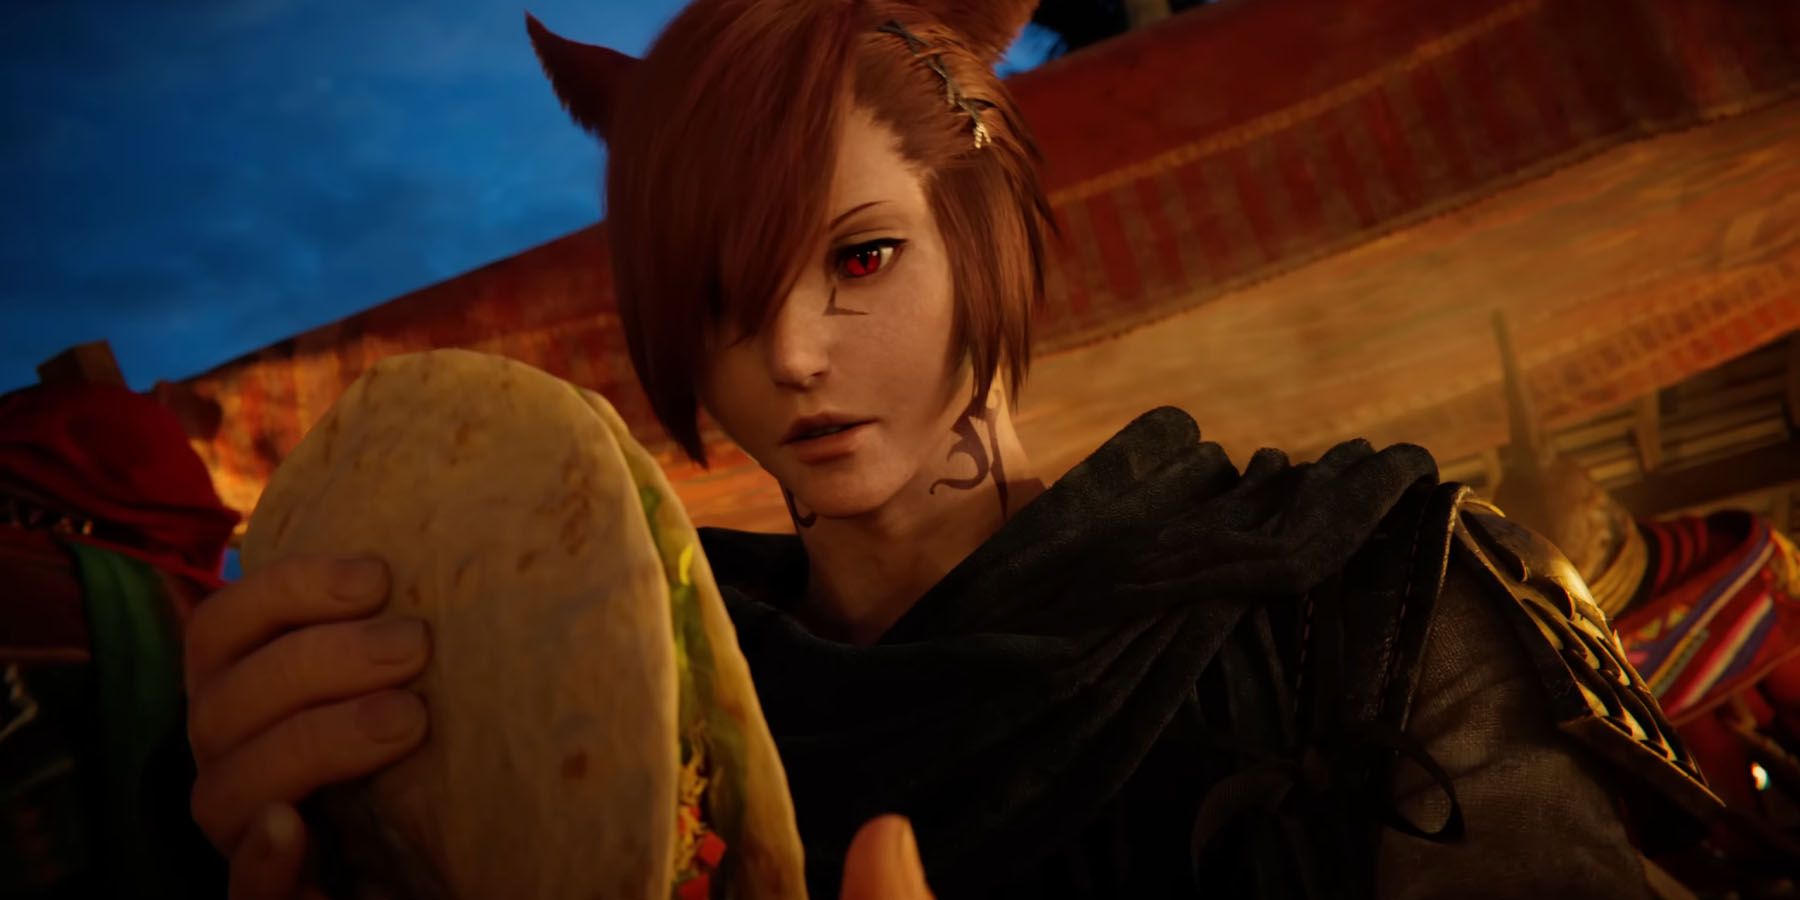 Final Fantasy 14 Director Talks About How Long He Plans to Support the Game